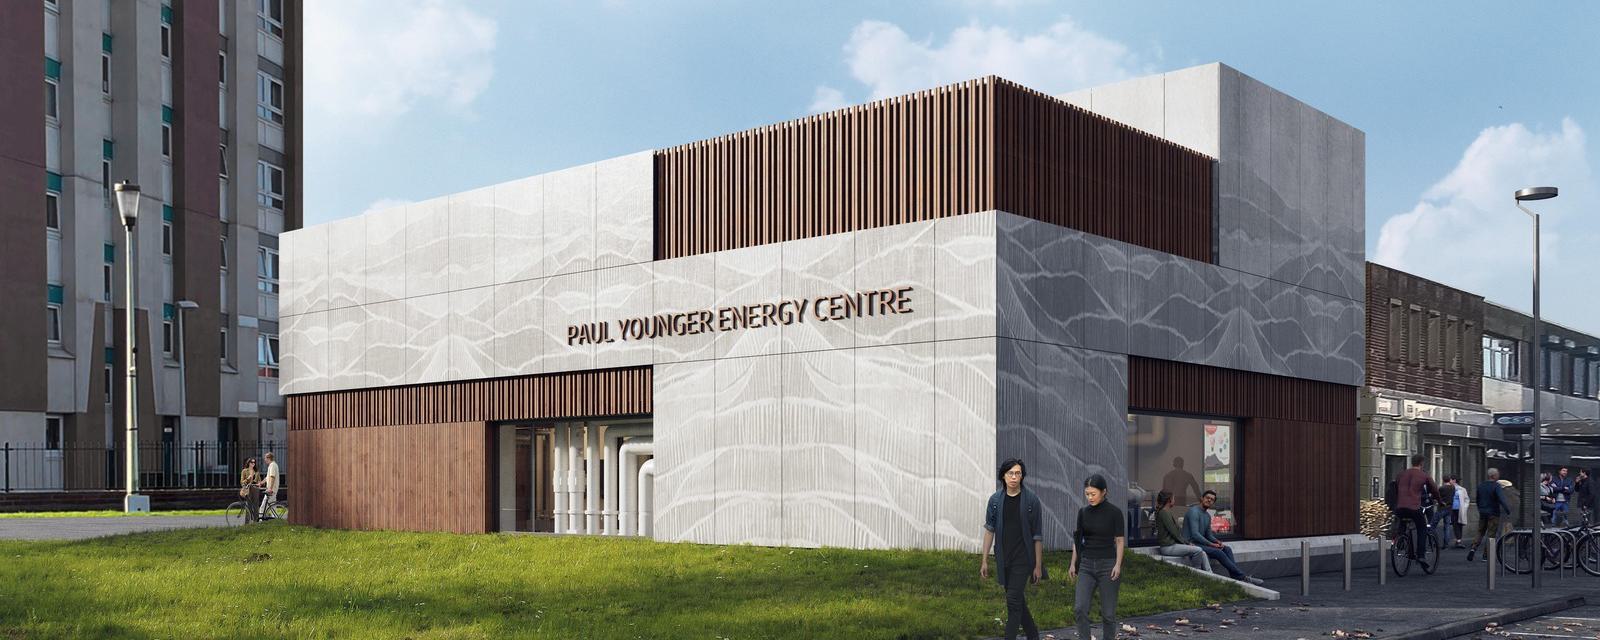 Paul Young Energy Centre - exterior of building